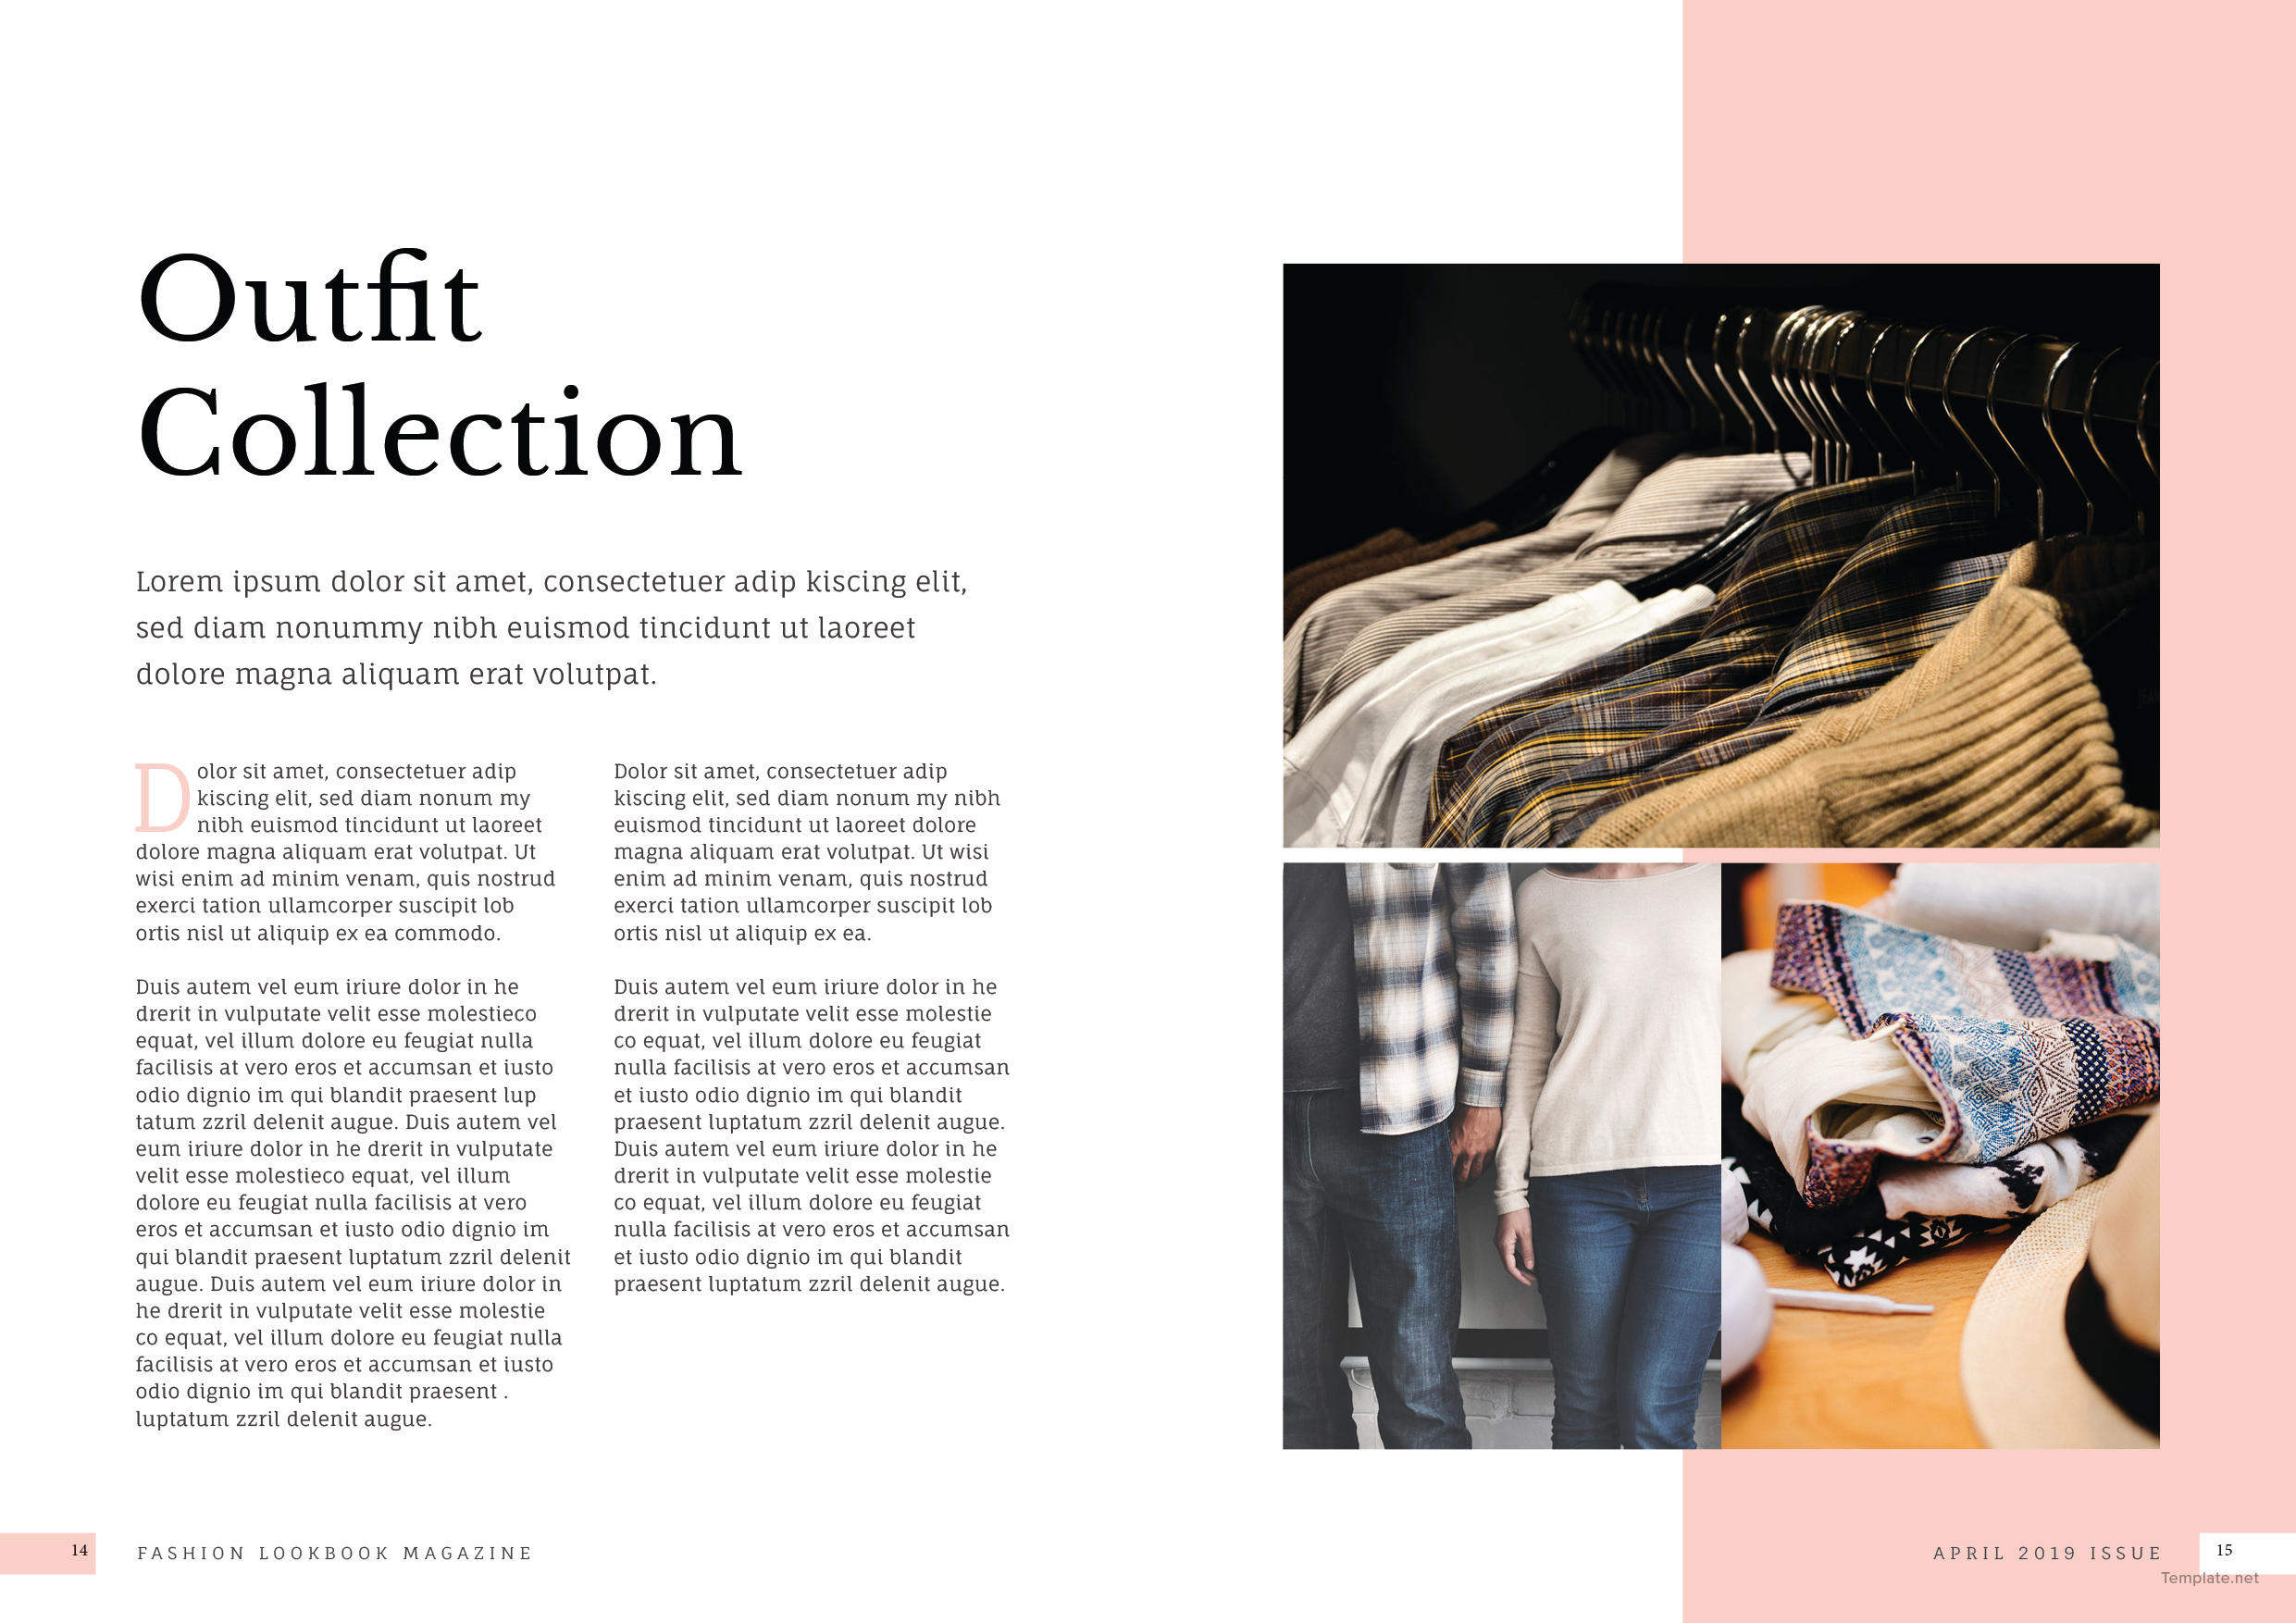 Free Fashion Magazine Template in Adobe InDesign | Template.net